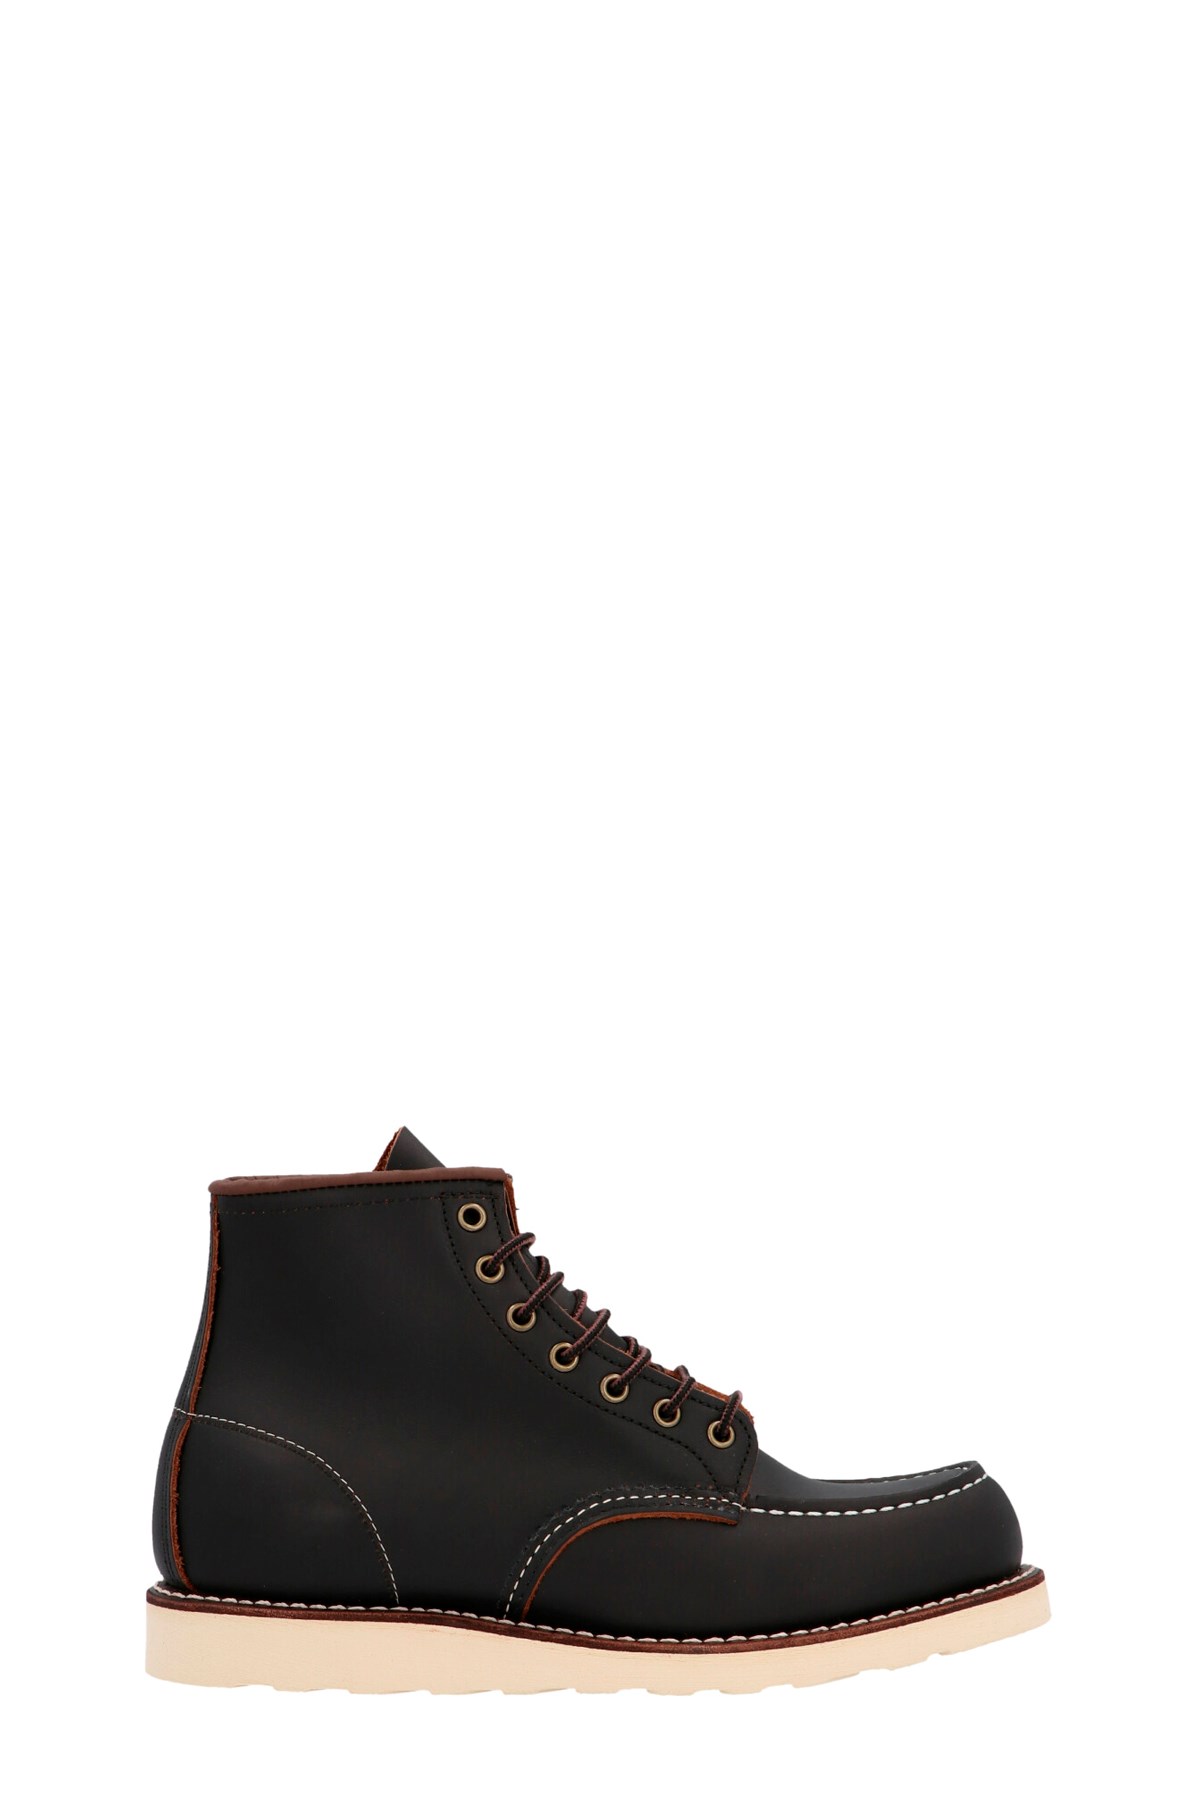 RED WING SHOES Stiefeletten 'Heritage 6 Inch Moc Toe’